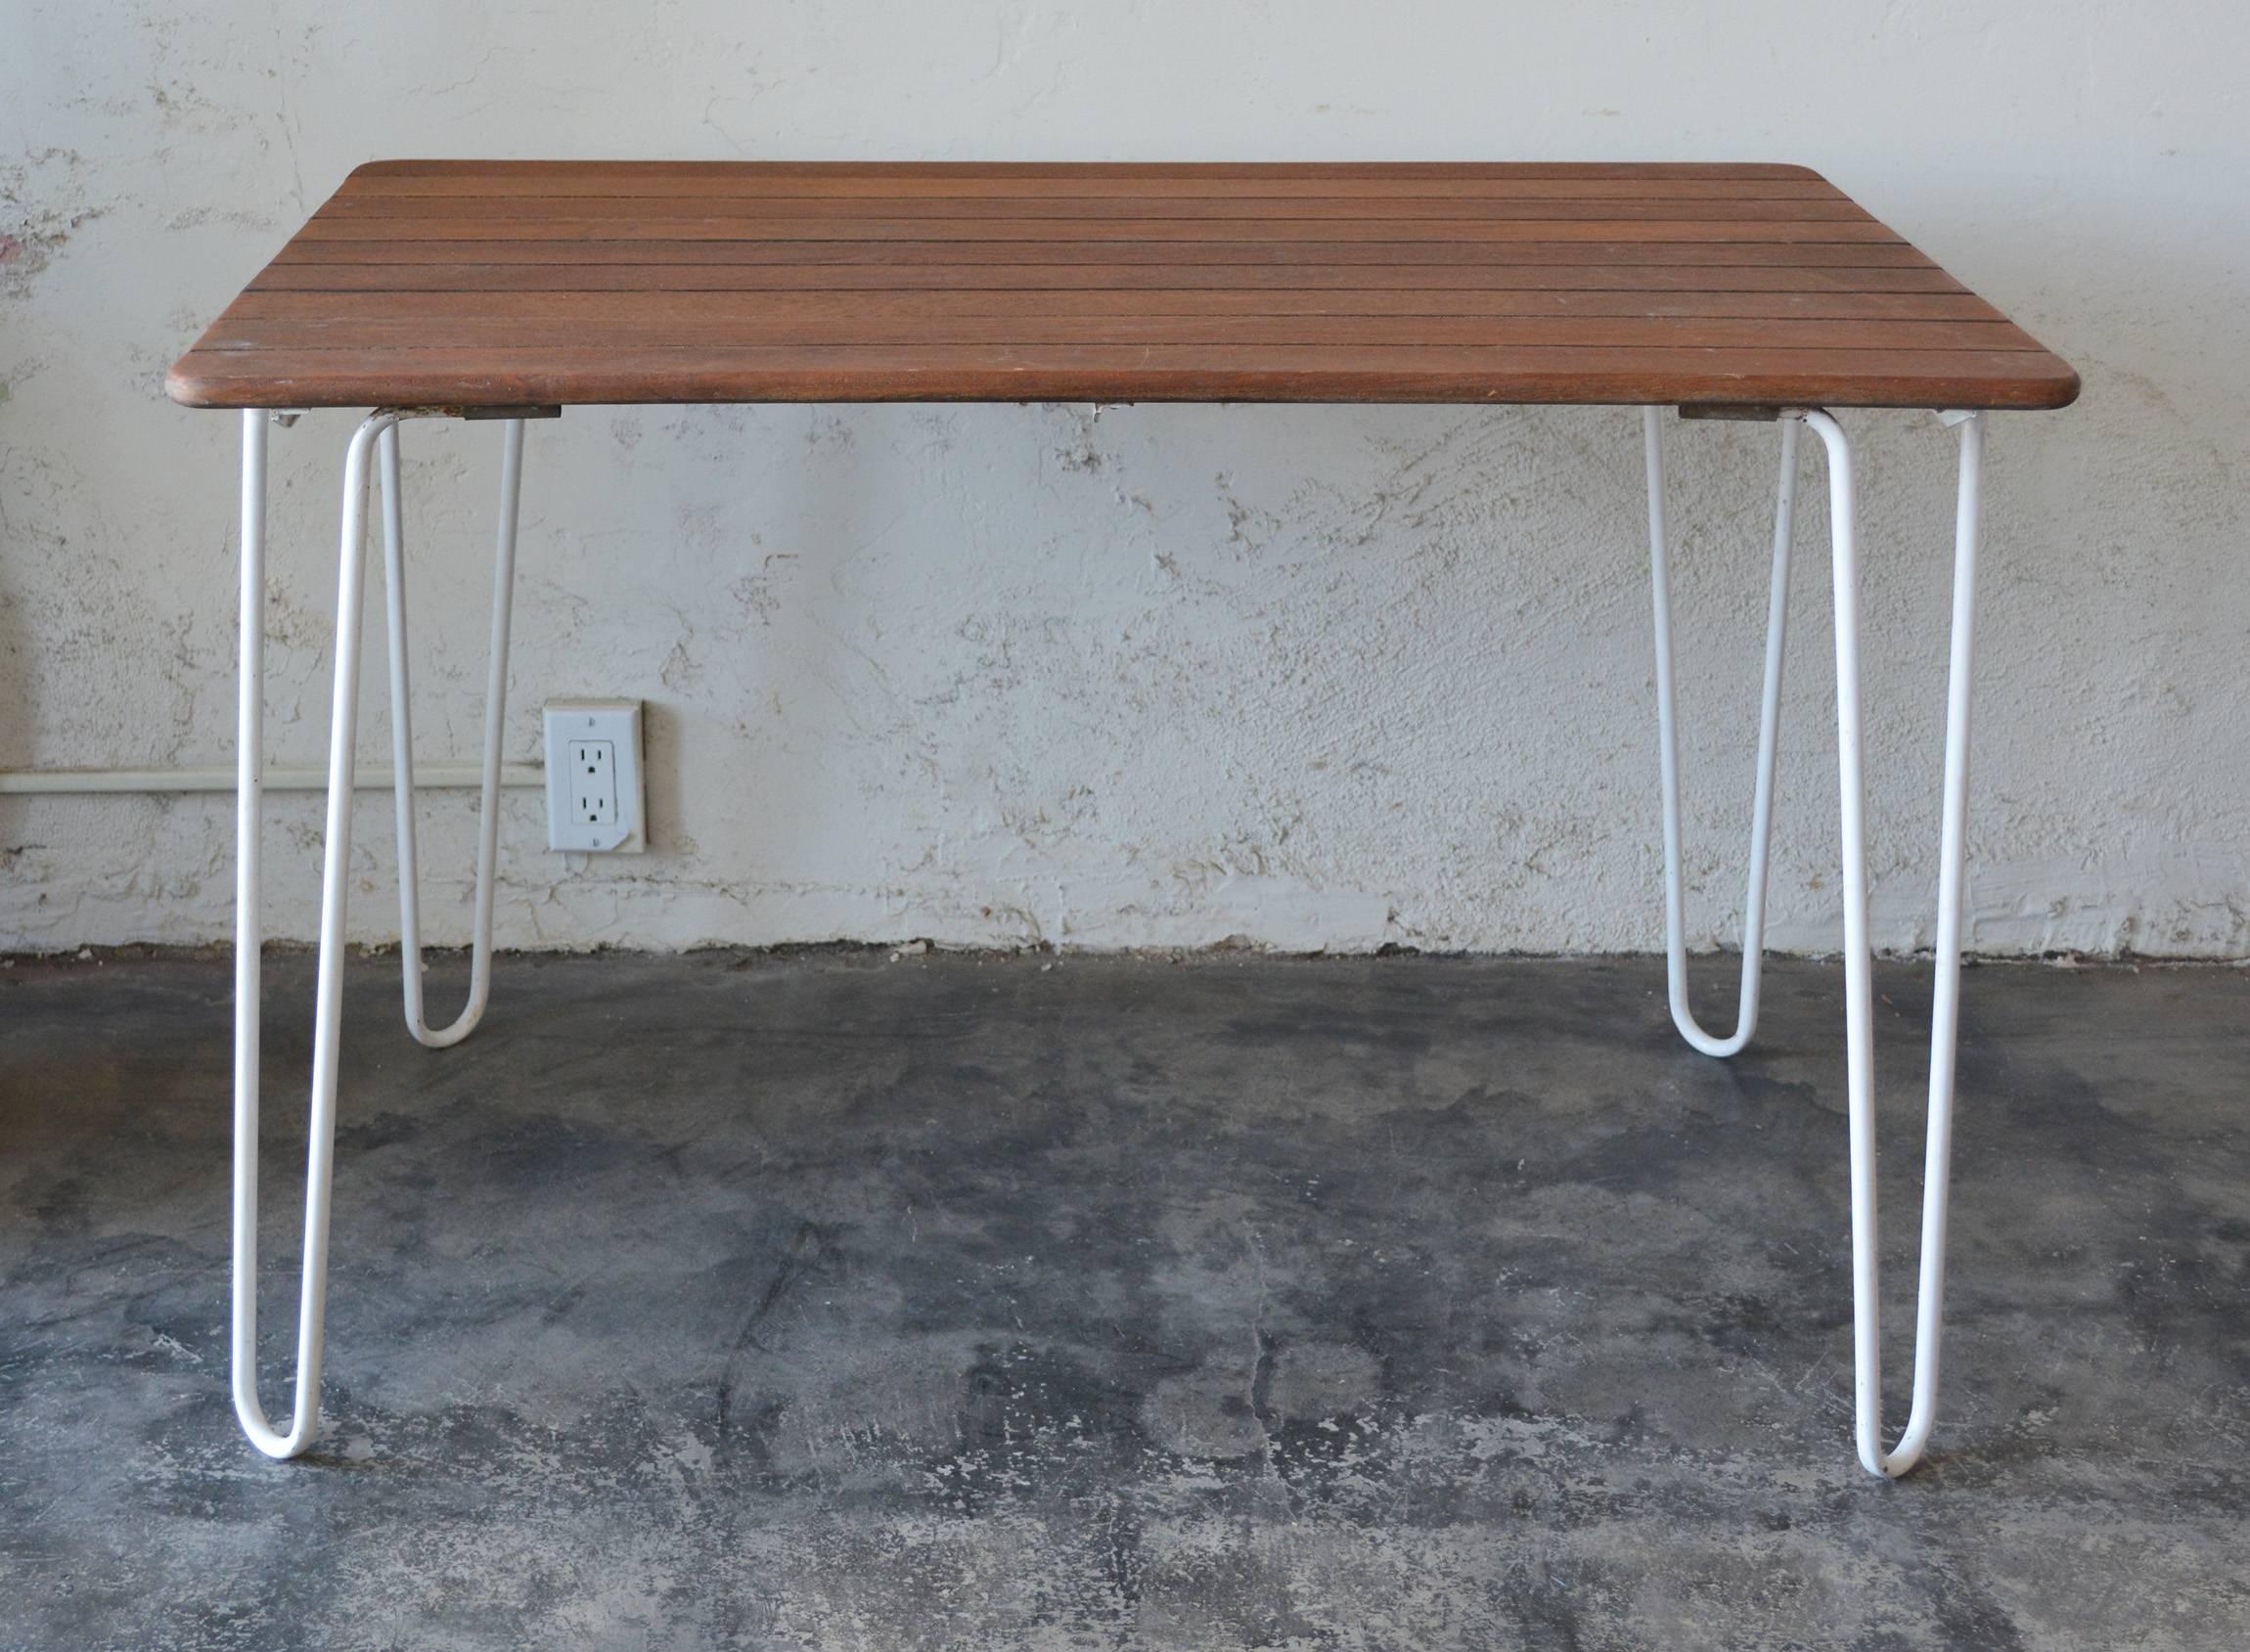 Small teak and iron dining table. This table has legs that are easily removed by sliding the end out of a bracket underneath the top. The top is made of solid teak boards. The metal has an older repaint. This table is a little lower than a normal